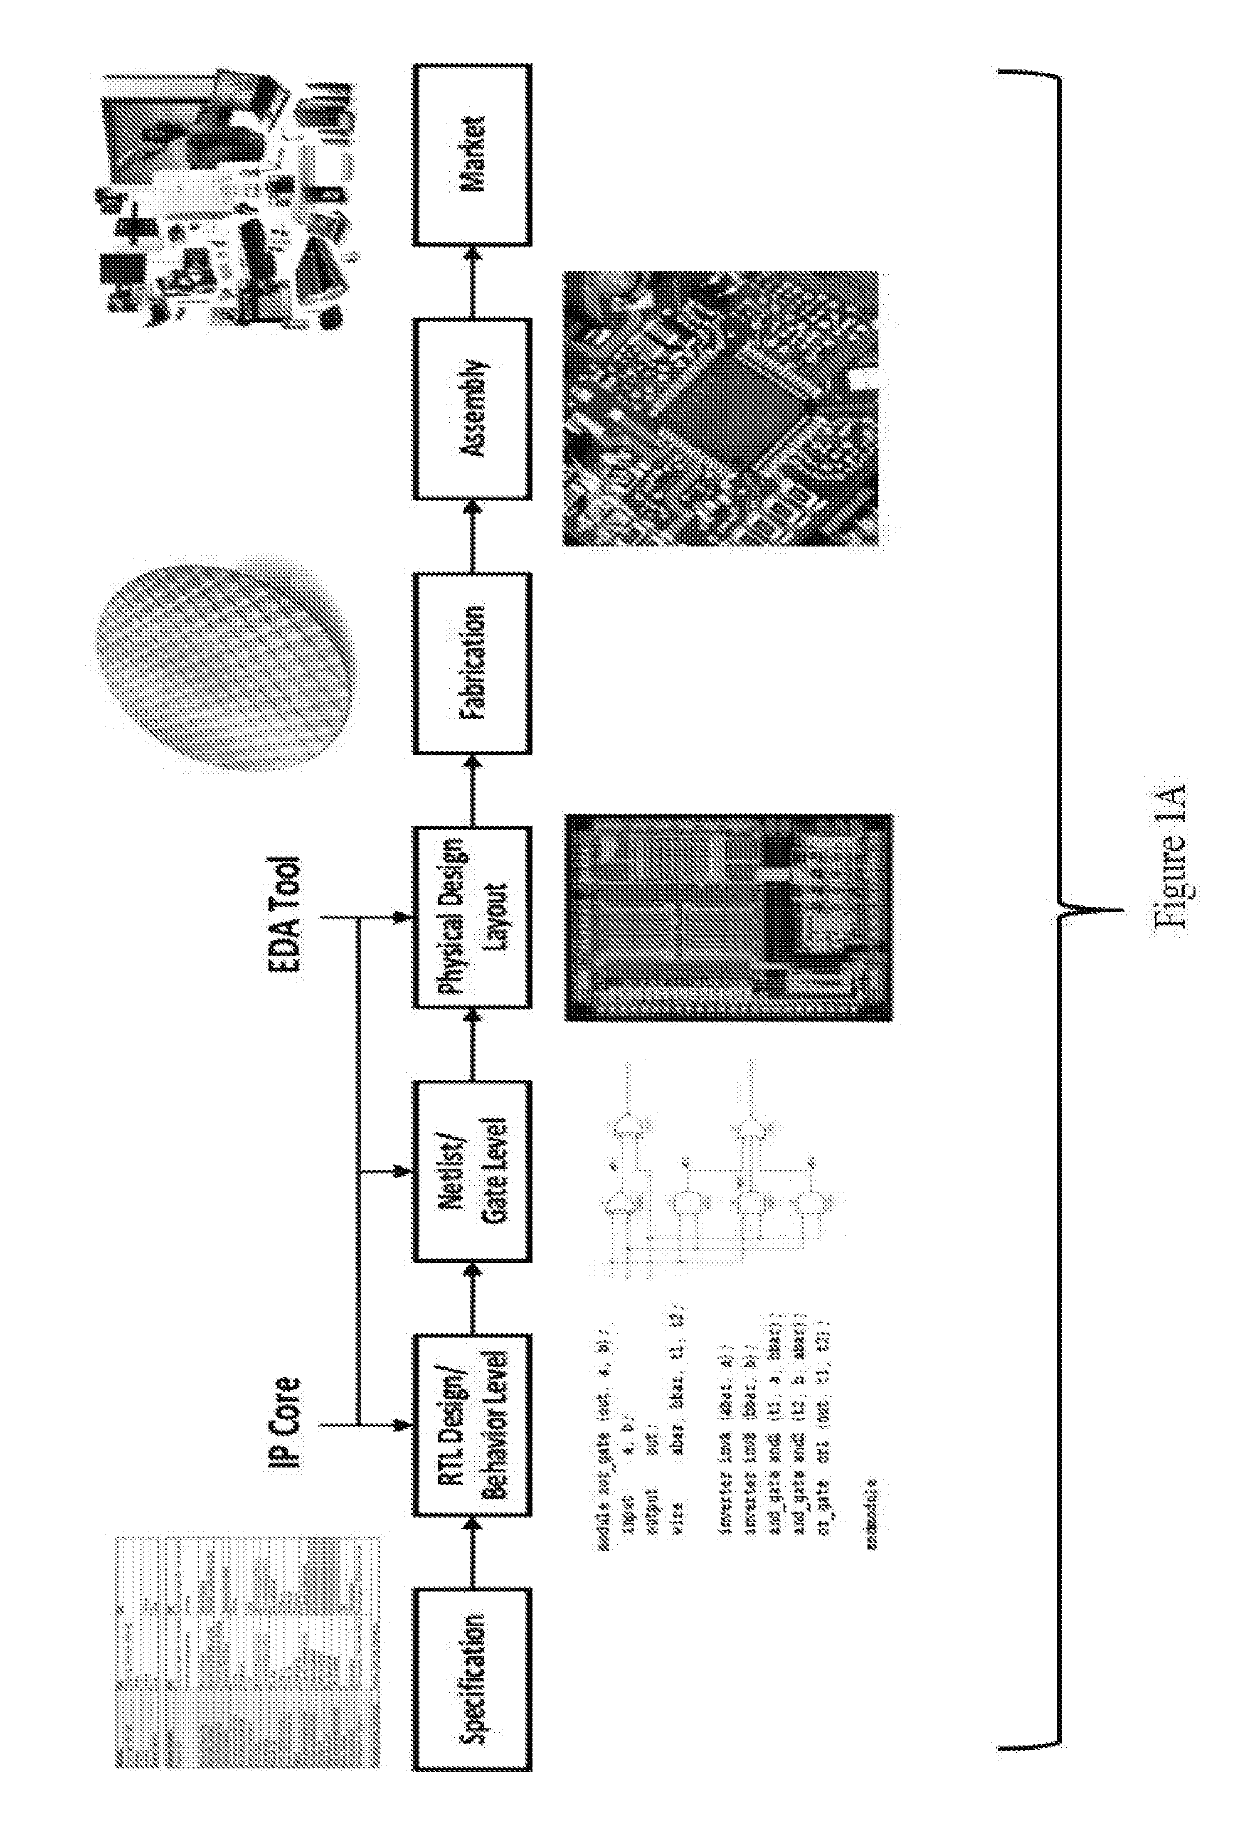 Circuit edit and obfuscation for trusted chip fabrication